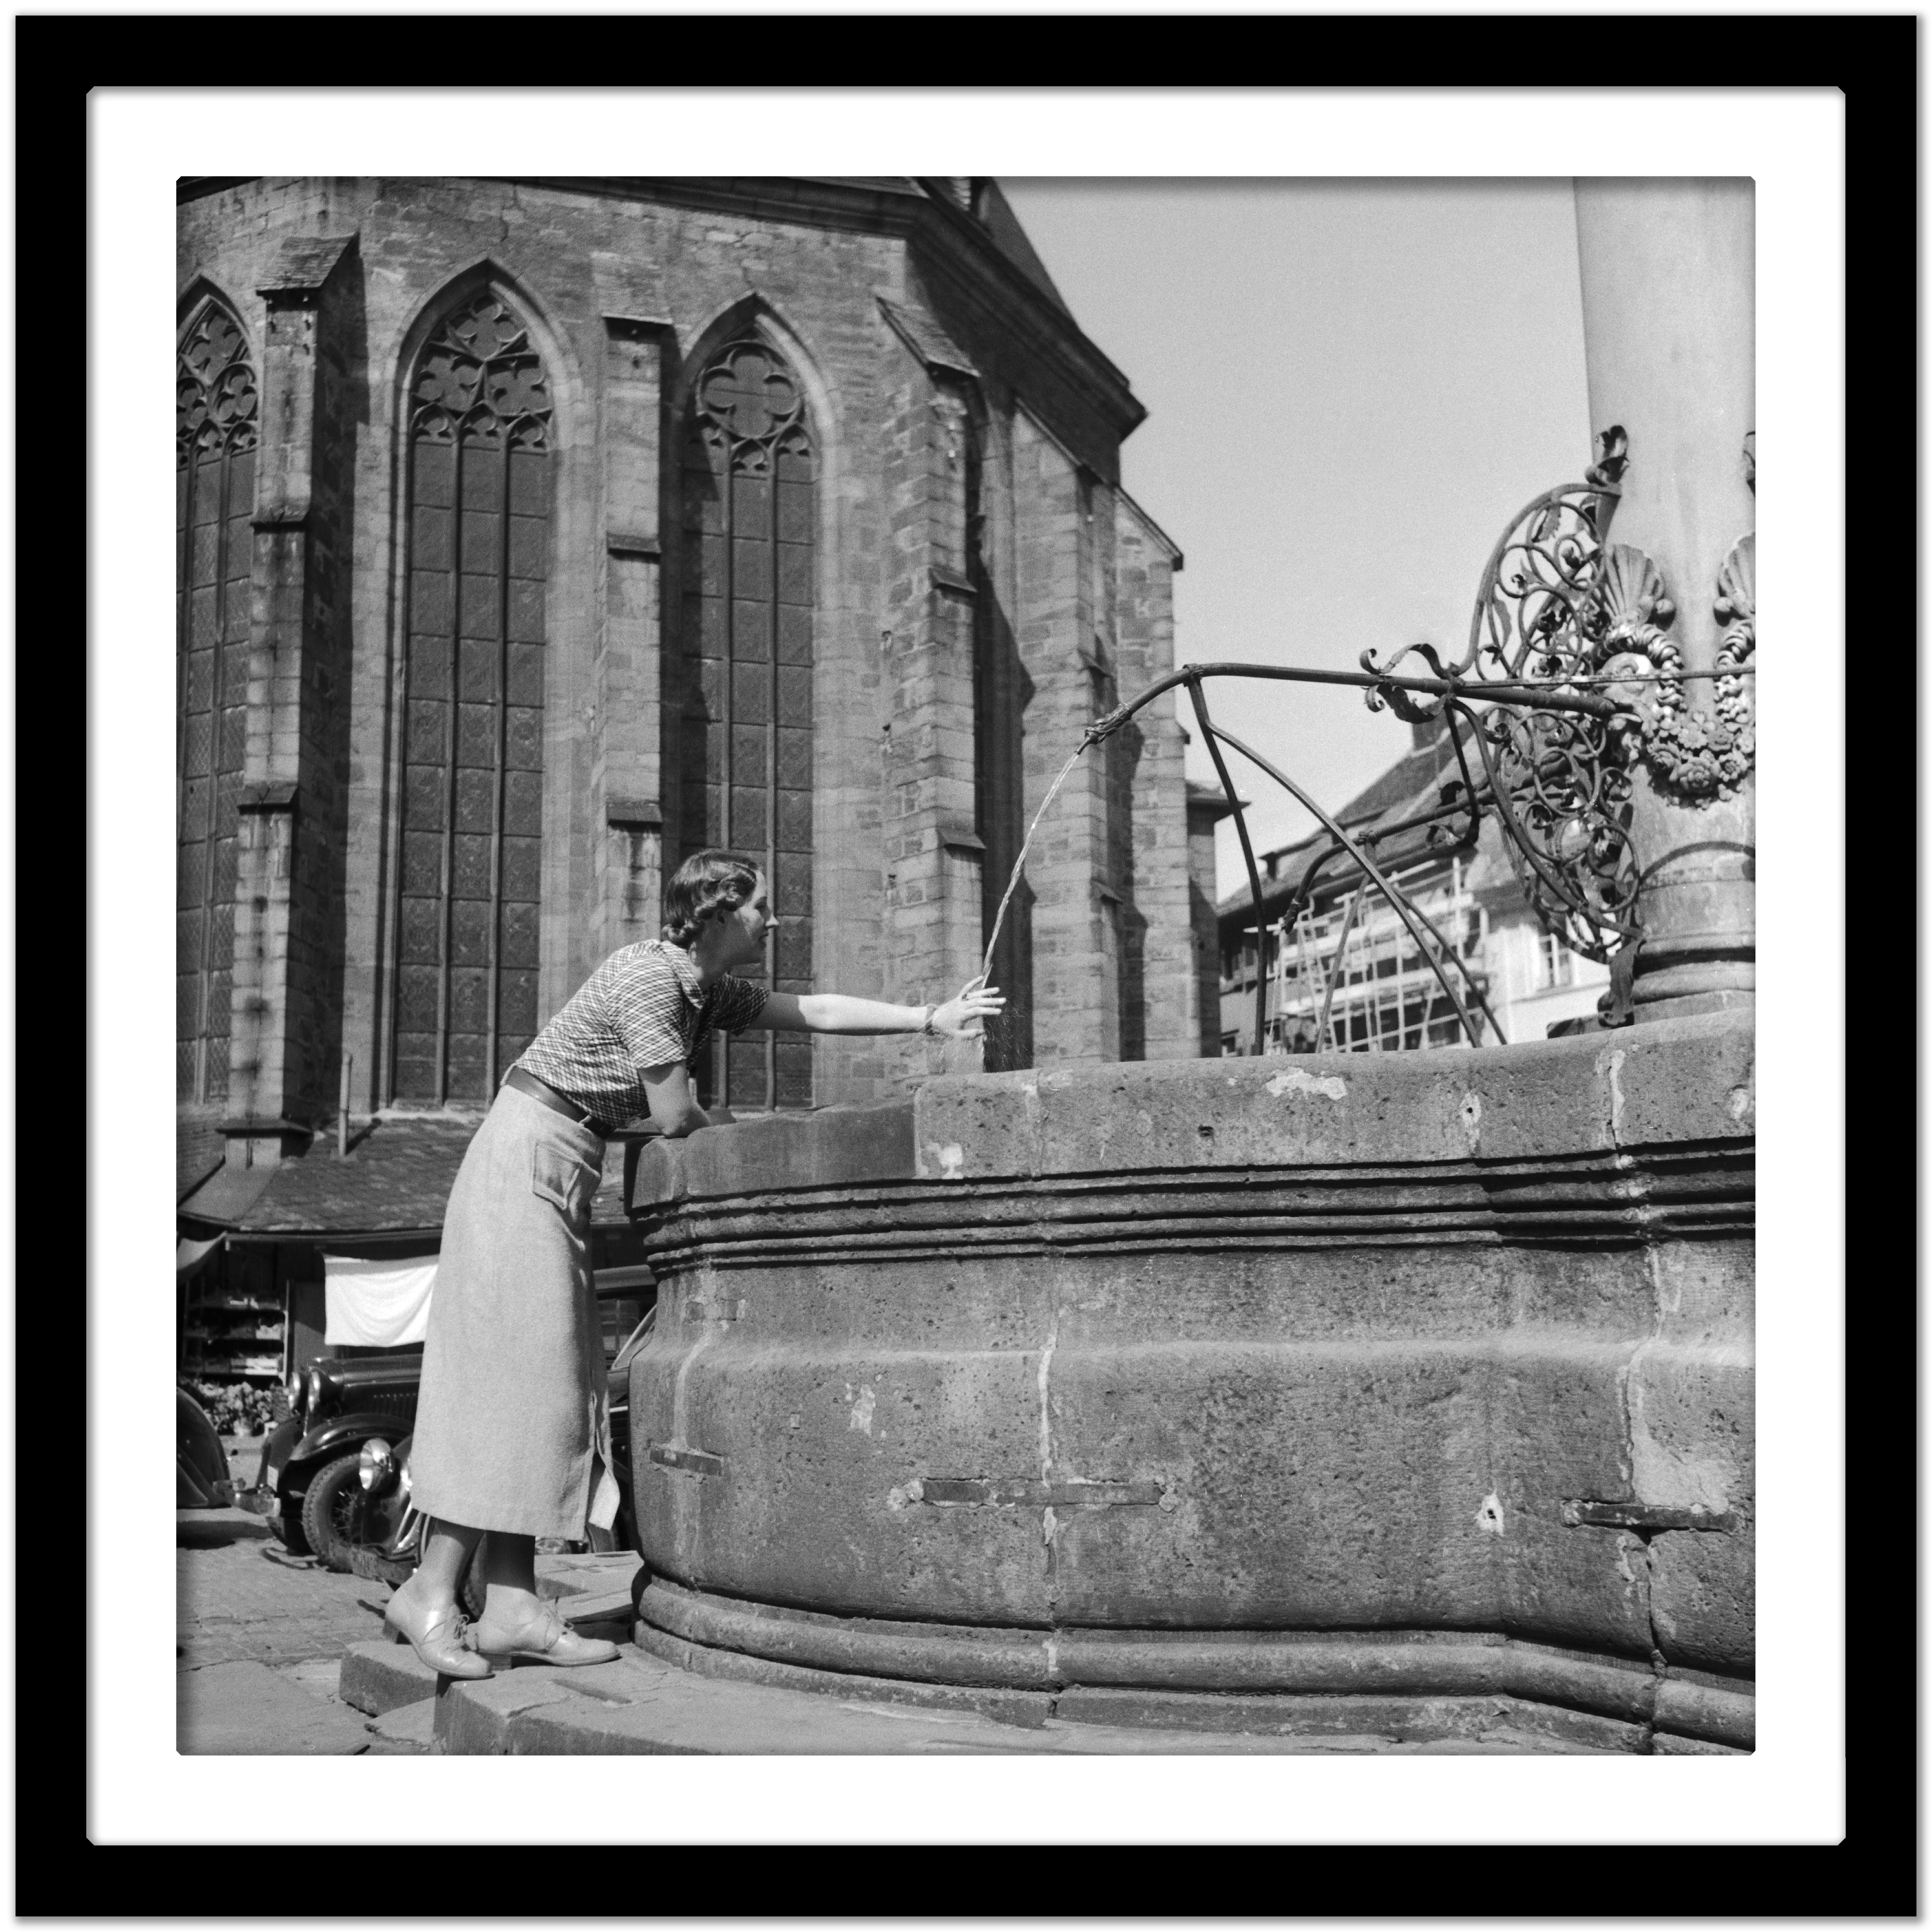 Woman, fountain, Heiliggeist church Heidelberg, Germany 1936, Printed Later  - Gray Black and White Photograph by Karl Heinrich Lämmel